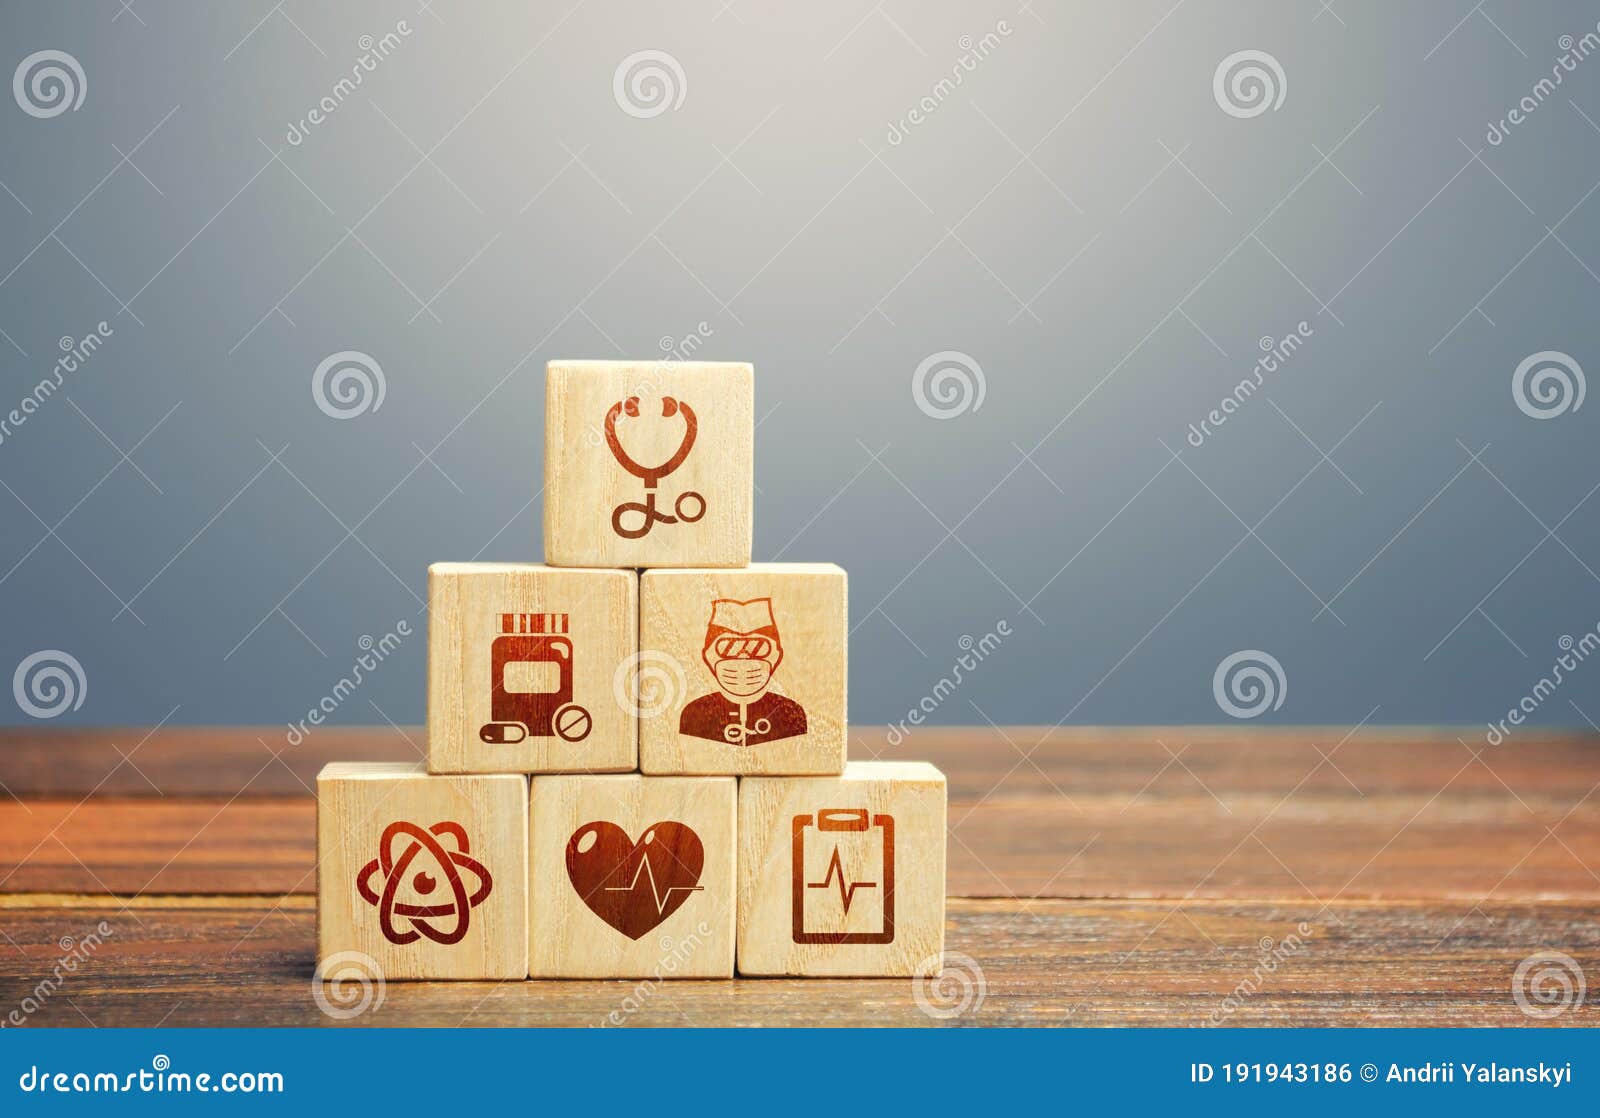 block pyramid with medical icons s. supplies, equipment and specialists for the normal functioning of hospitals in the fight